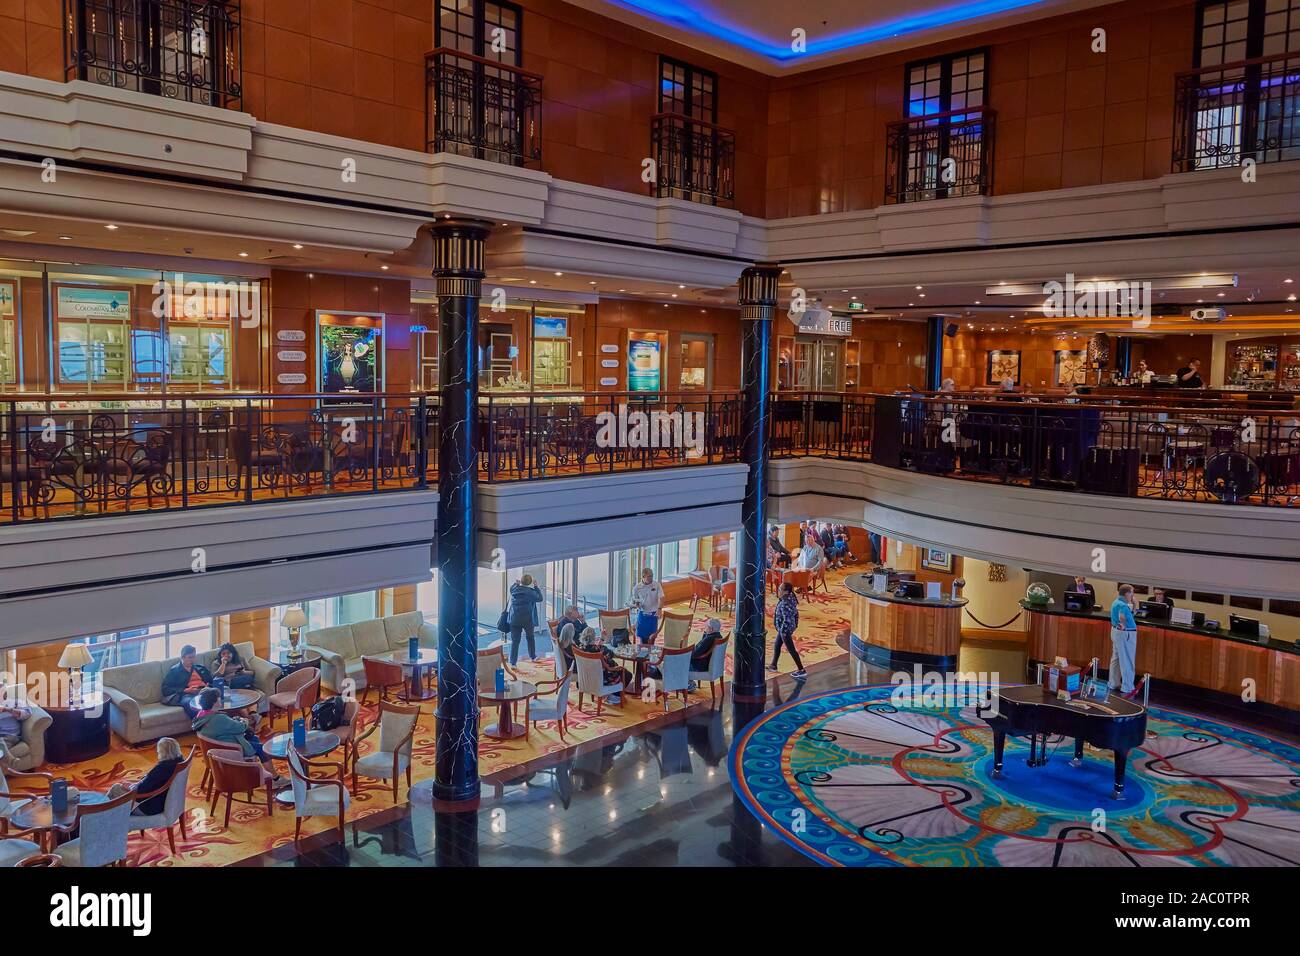 Taken on board the Norwegian Spirit cruise ship on one of the shopping and cafe decks and Atrium. Stock Photo